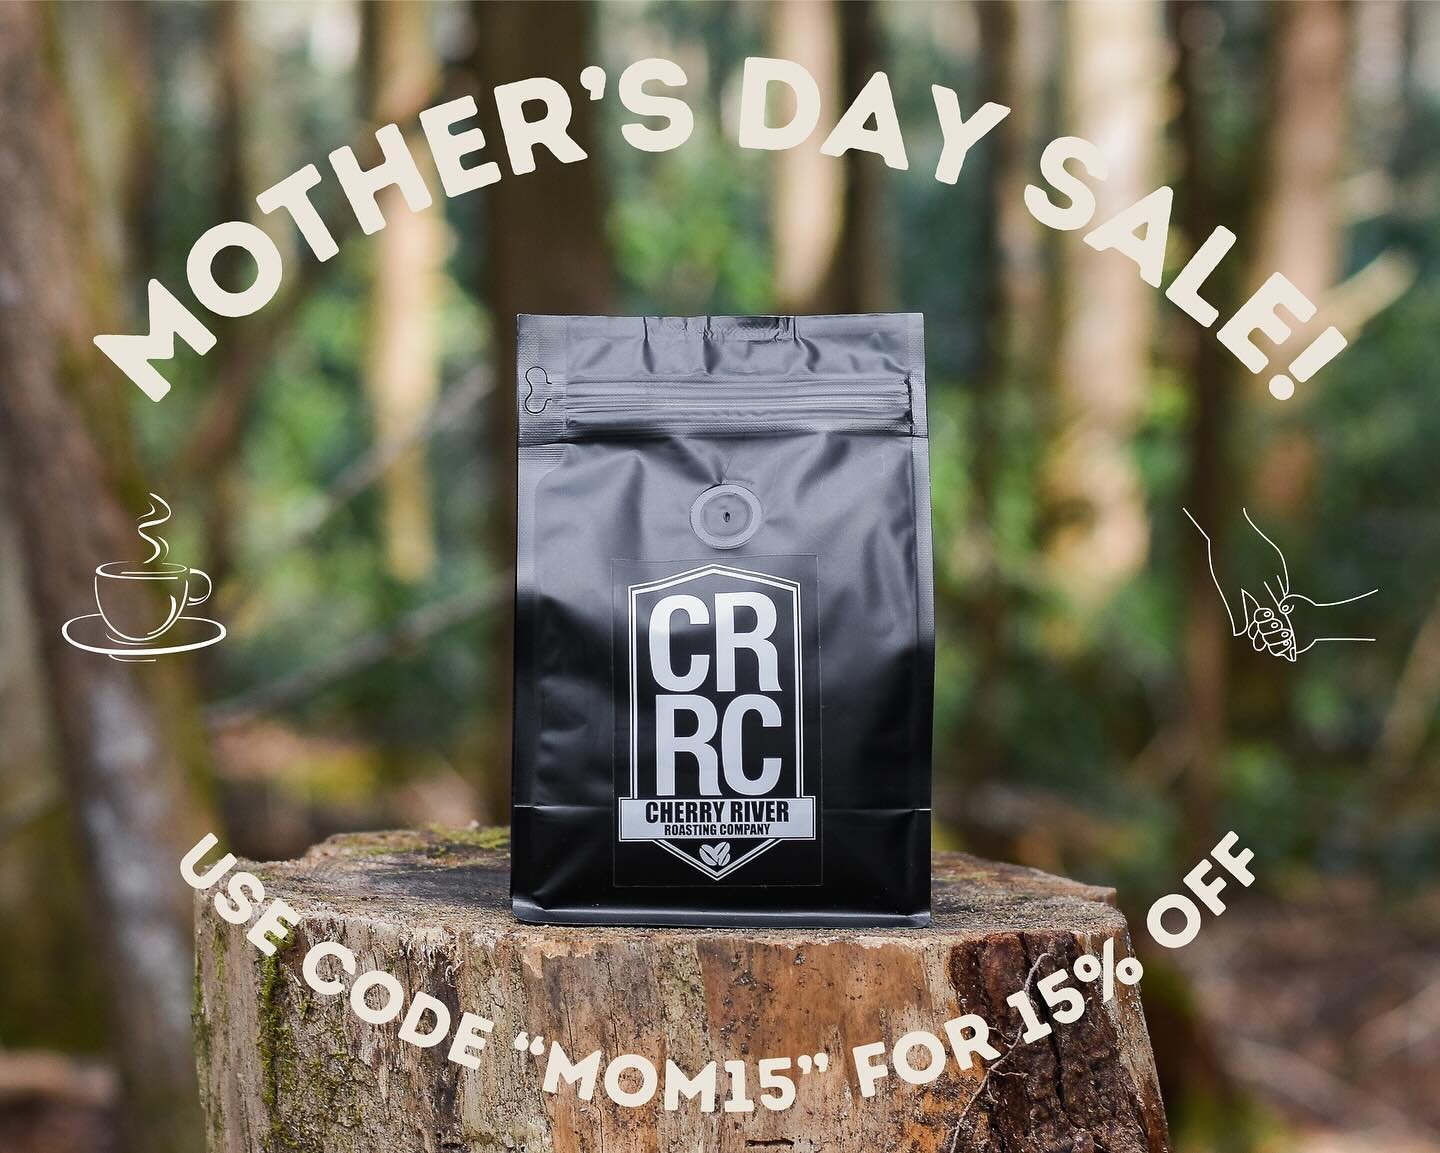 Celebrate Mother&rsquo;s Day by using our code &ldquo;MOM15&rdquo; to get 15% off on your online order! Code is valid until Sunday, May 12th at 11:59 PM. 

Give your mom the gift of coffee to start her day off right! ❤️☕️
.
.
.
.
.
.
#visitrichwood #